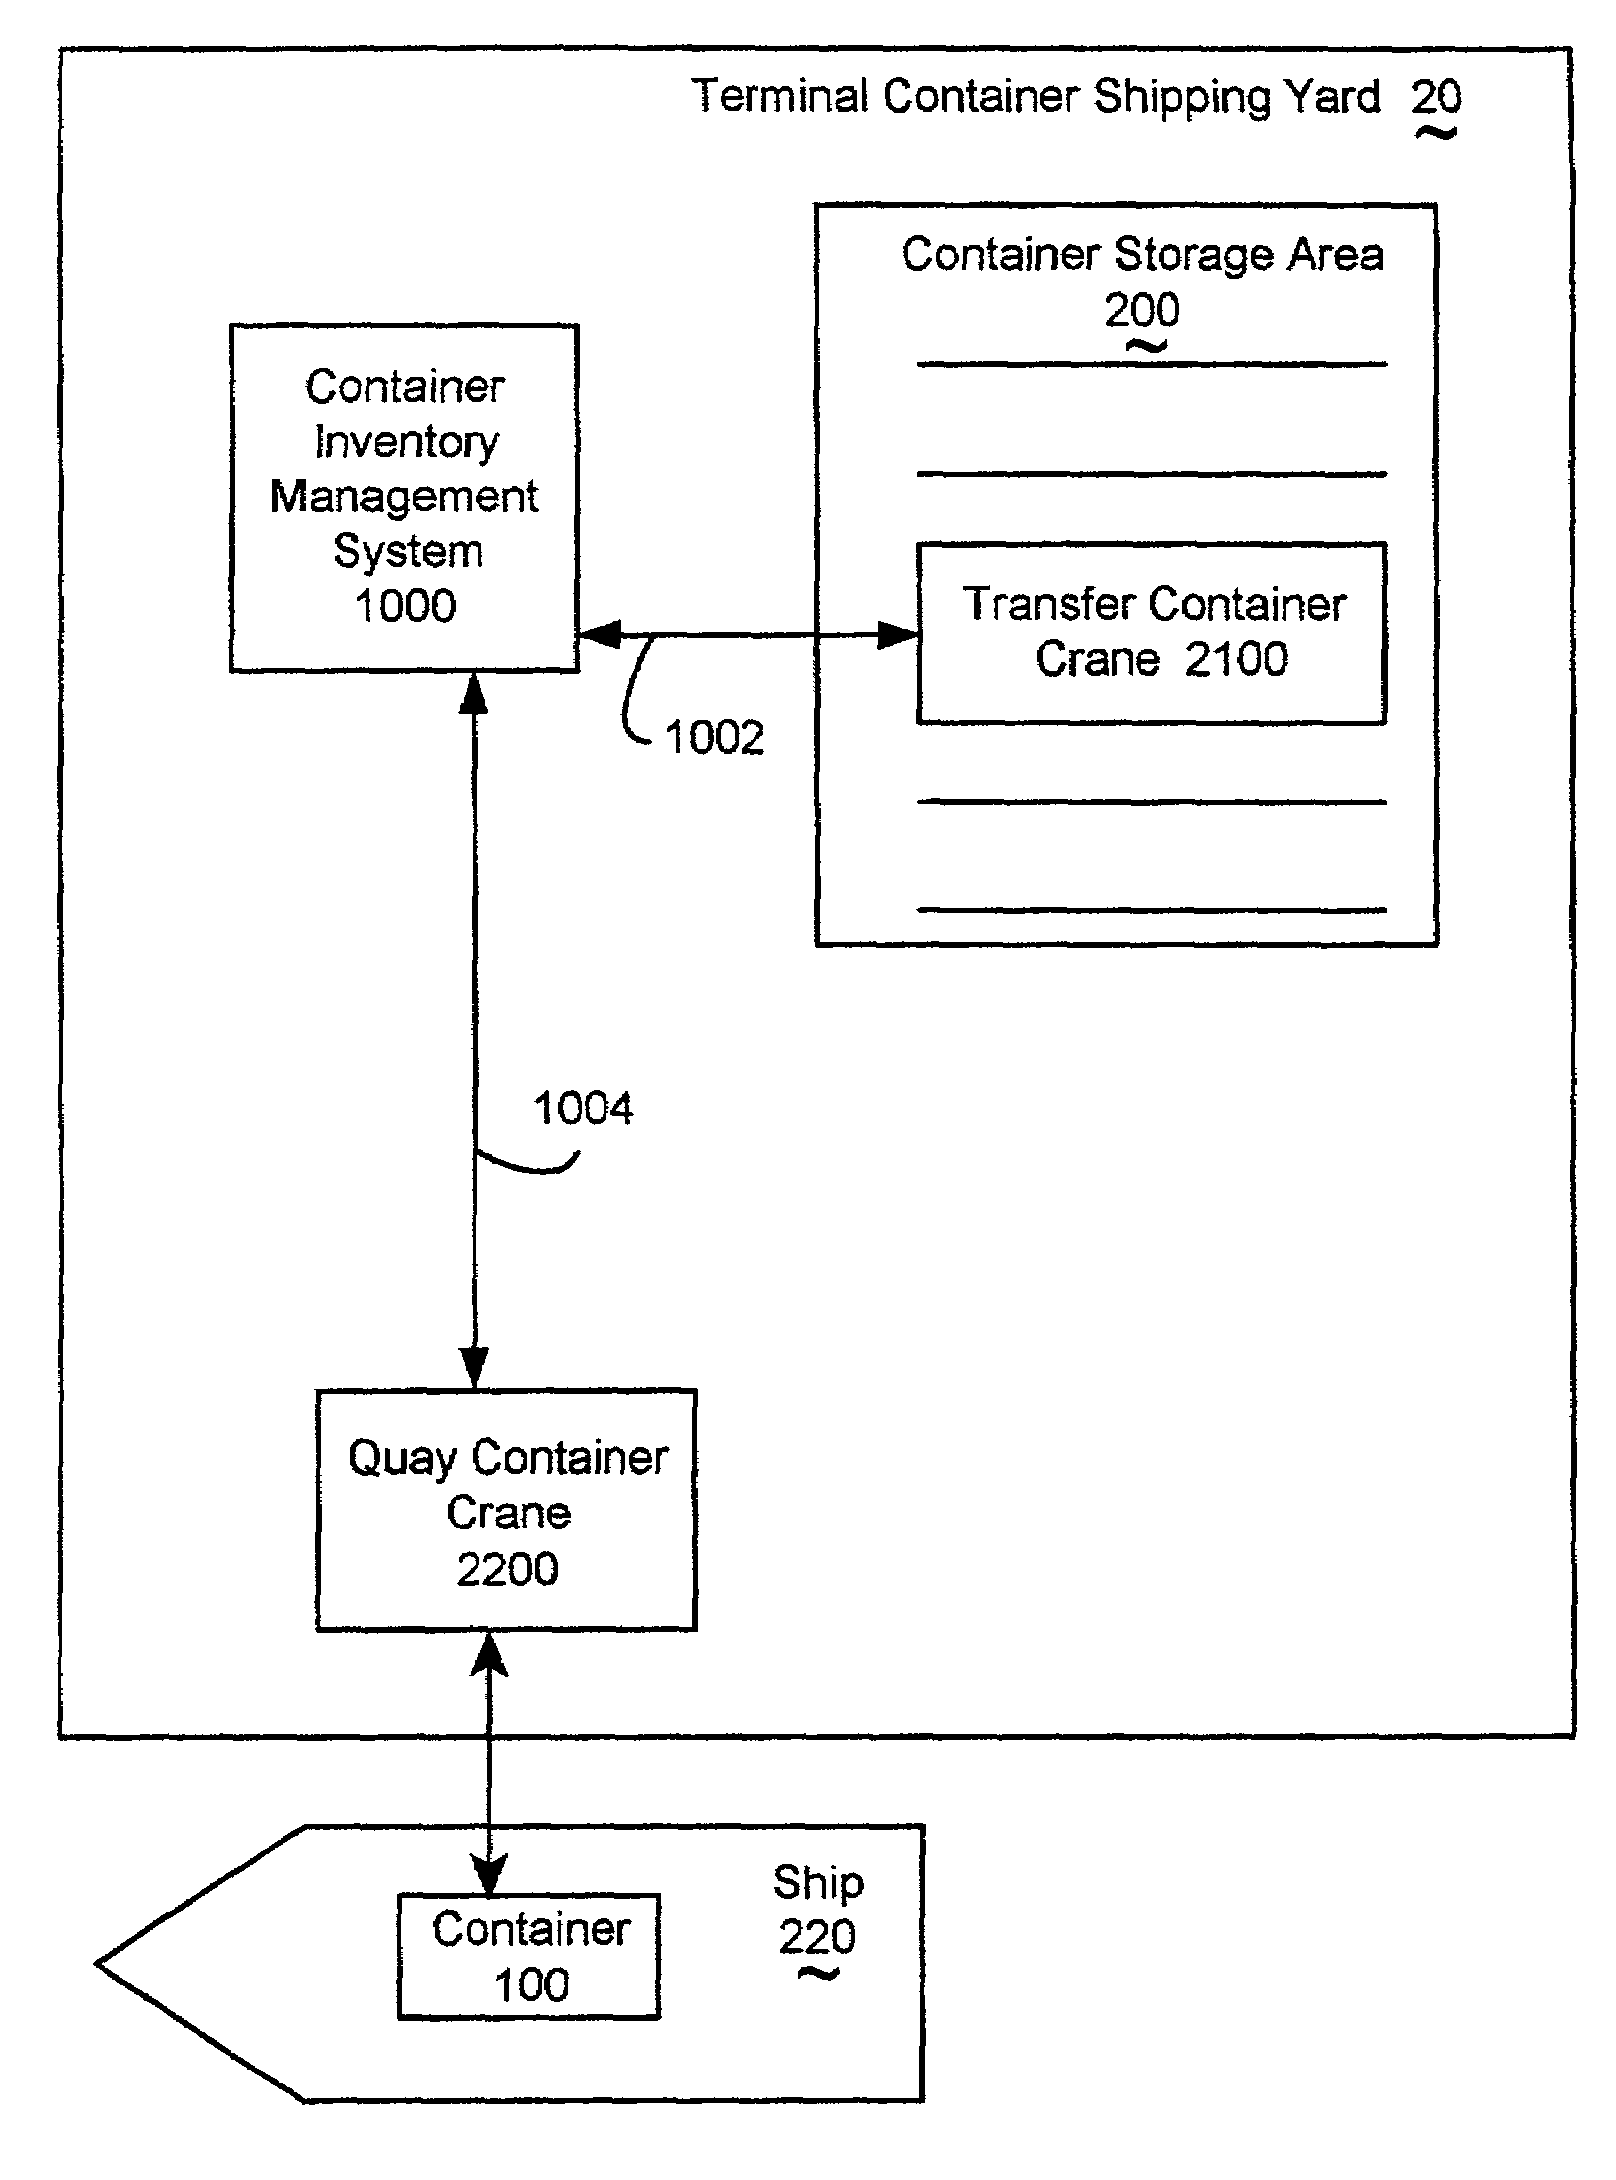 Method and apparatus of automated optical container code recognition with positional identification for a transfer container crane